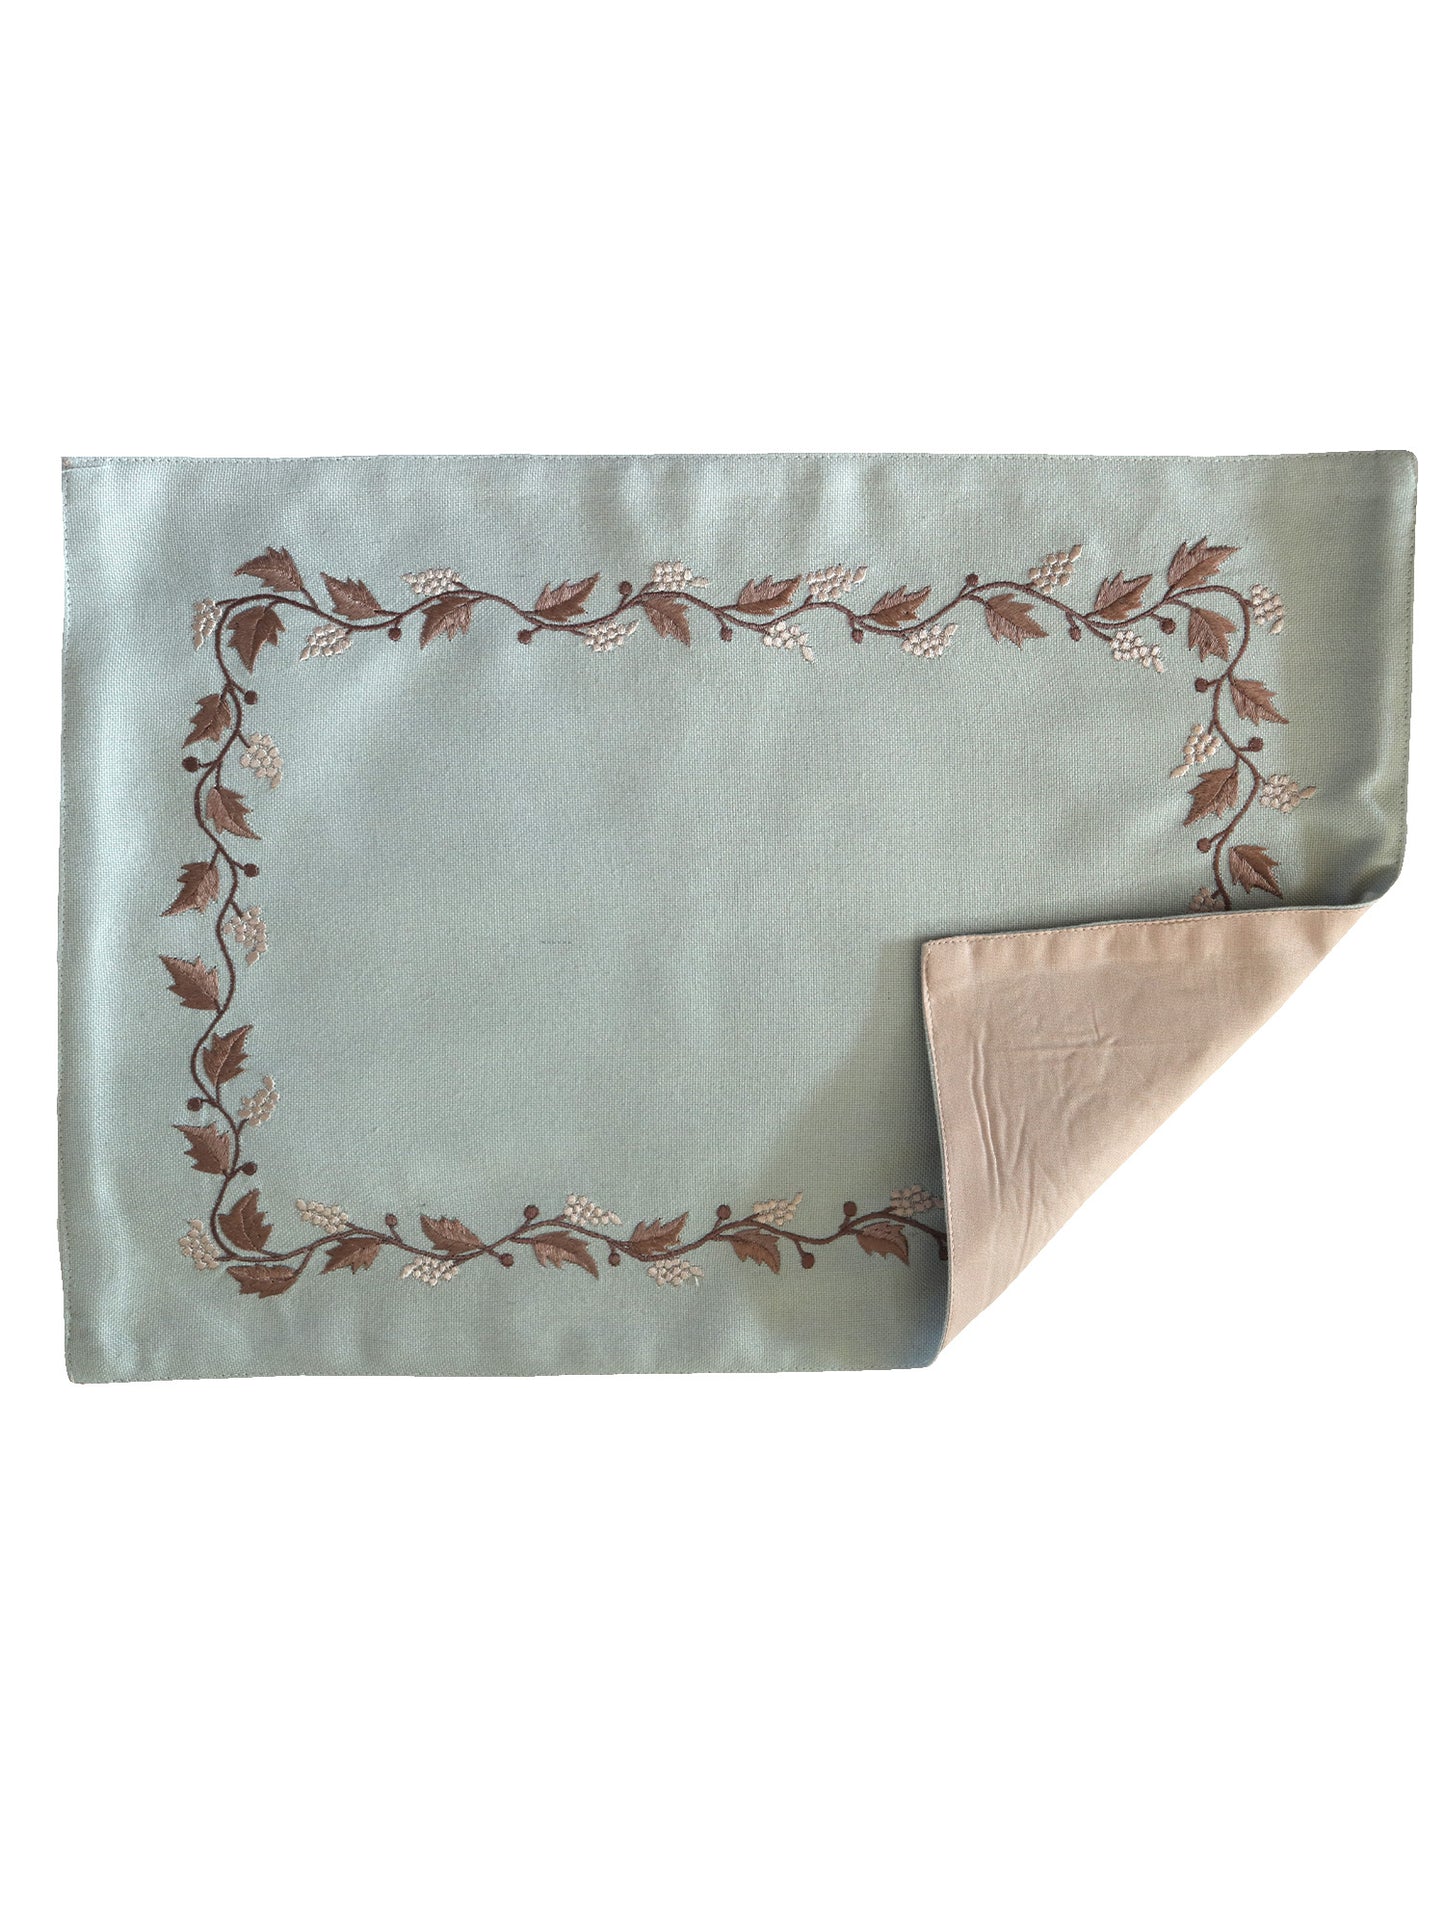 Embroidered Placemat/Tablemats and Napkins Set Polycanvas - Beige Set of 6 Mats 13x19 in & 6 Napkins 16x16in (33x48 cms, 40x40 cms)